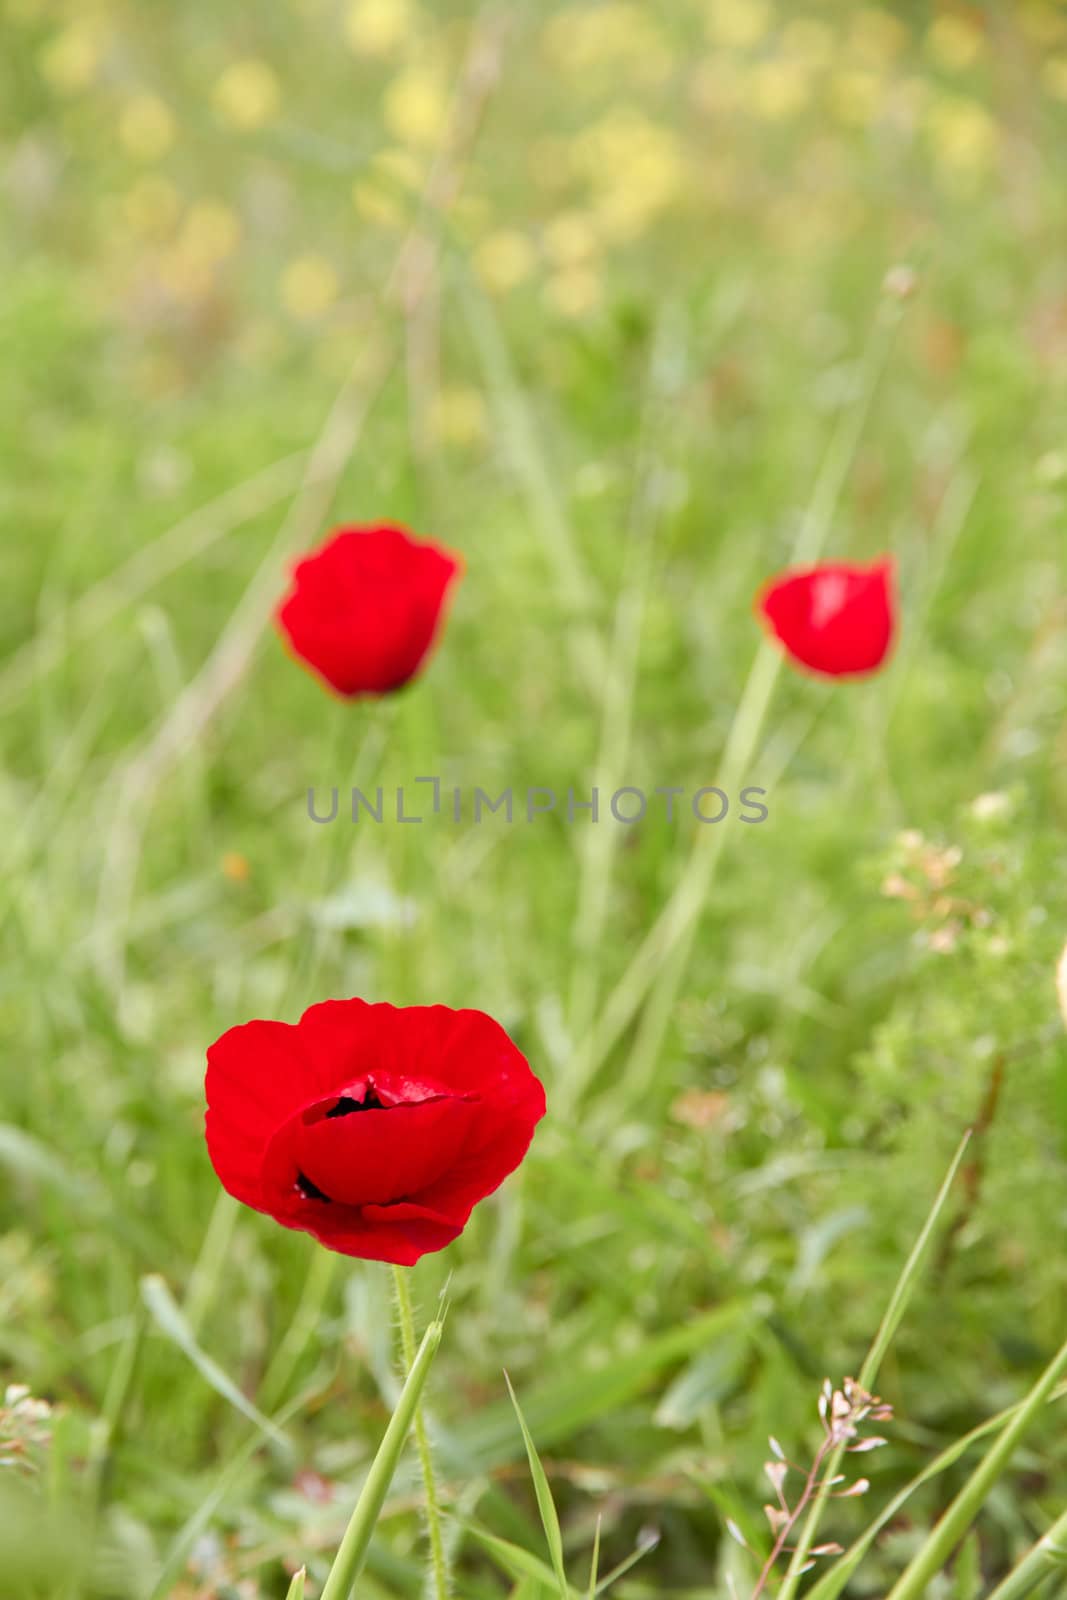 Three red flowers in front of the greens and focused one of them.